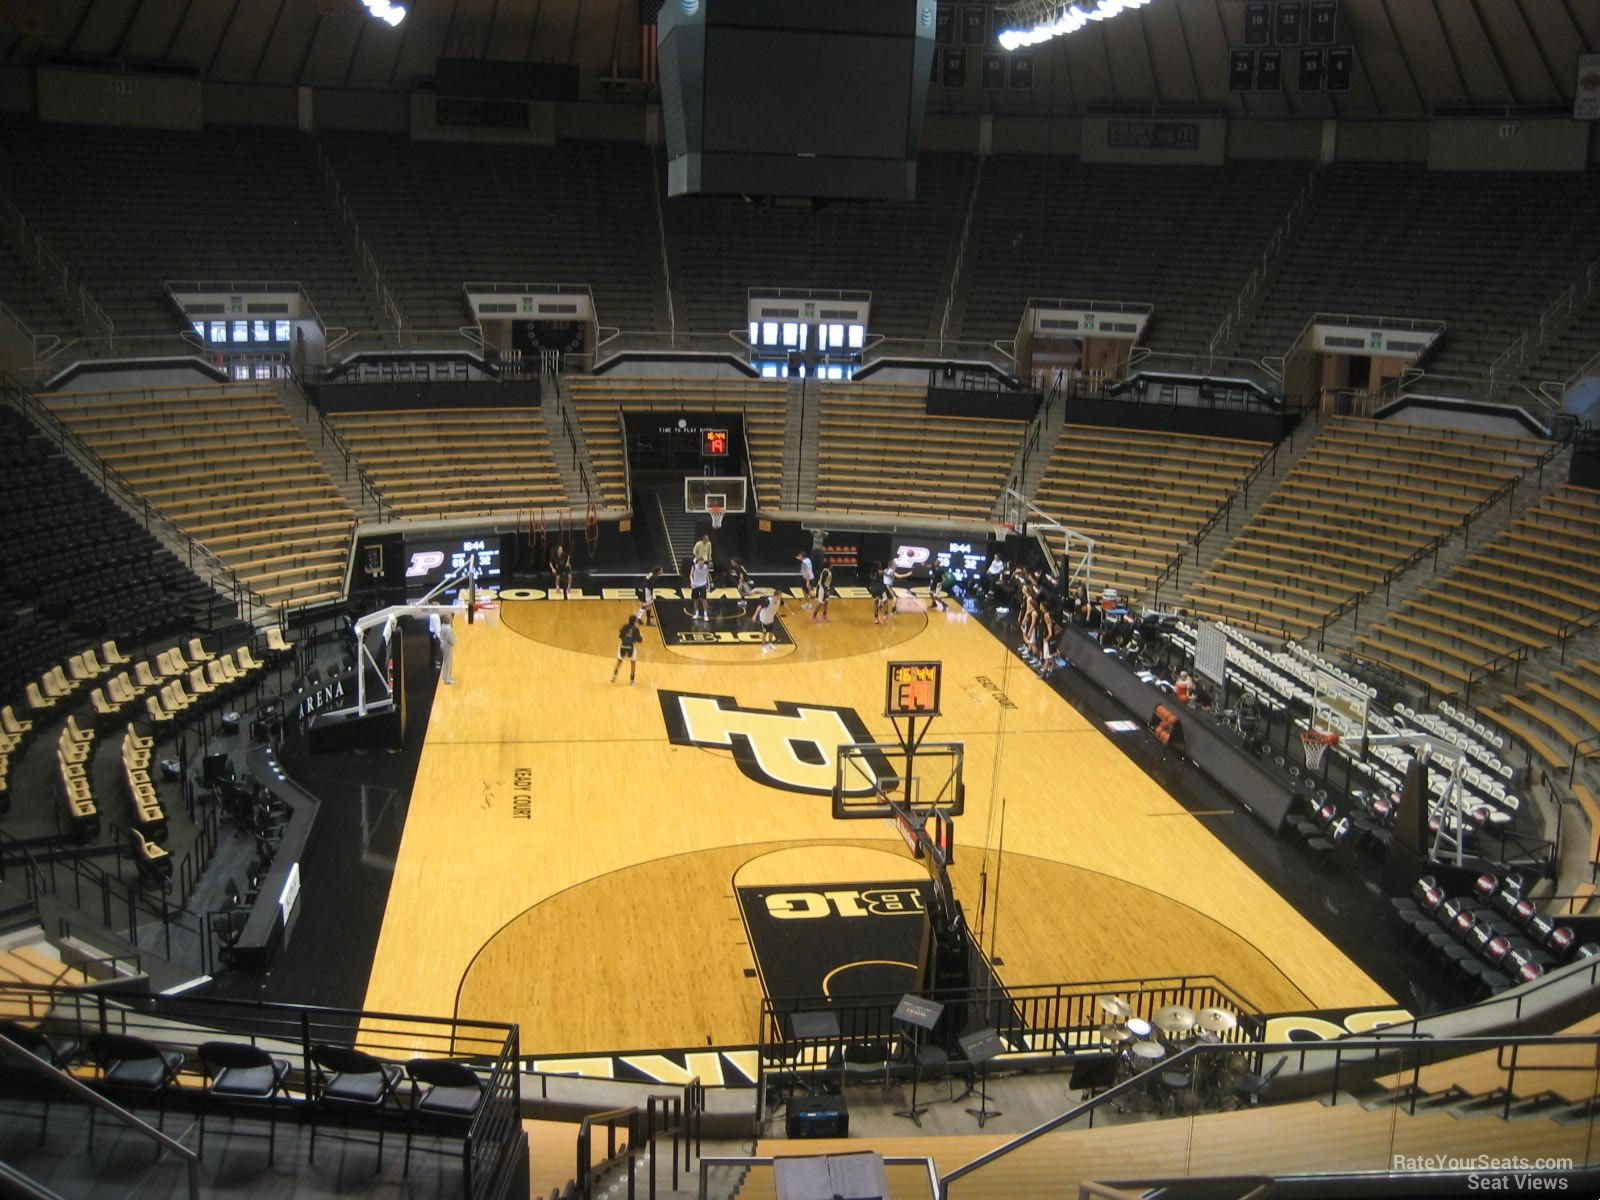 section 107, row 10 seat view  - mackey arena